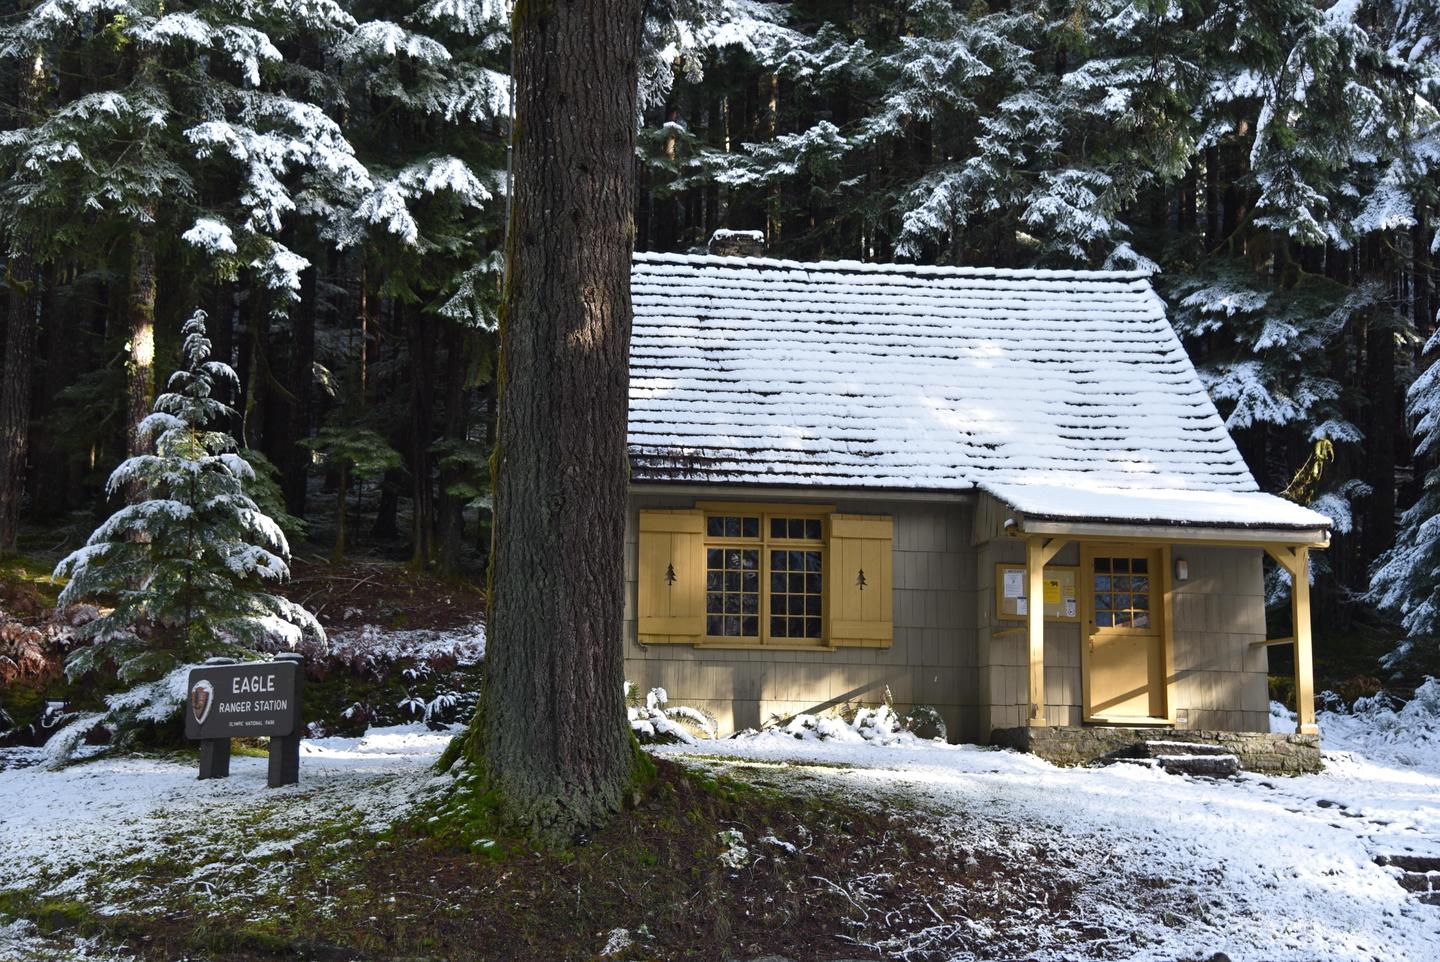 Preview photo of Sol Duc - Eagle Ranger Station